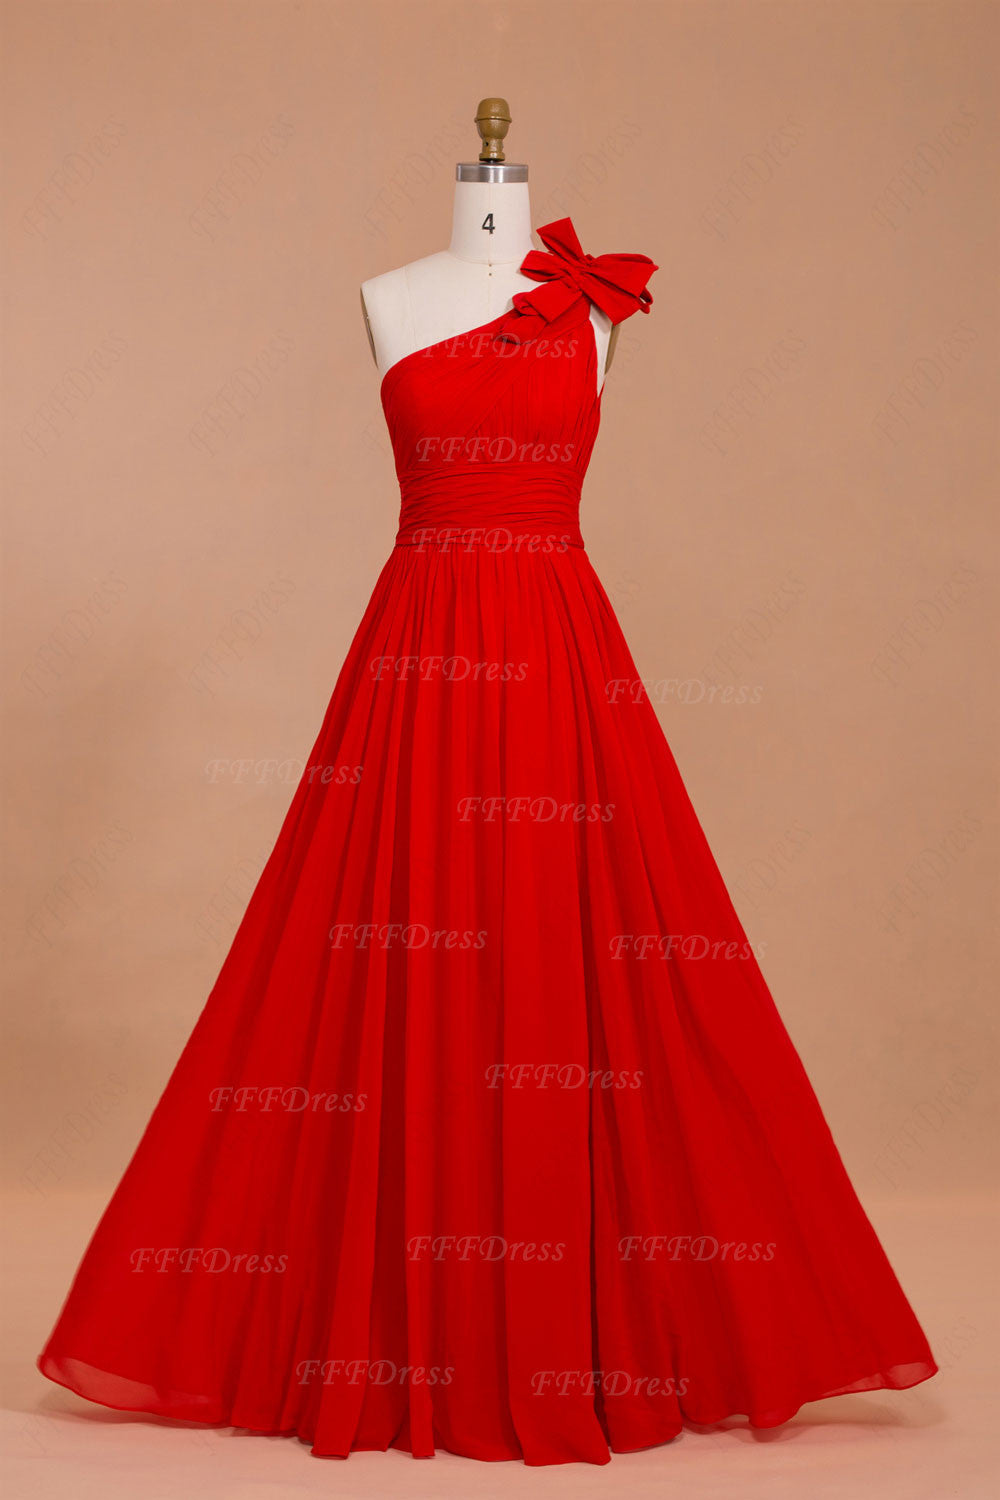 One shoulder red chiffon long prom dresses